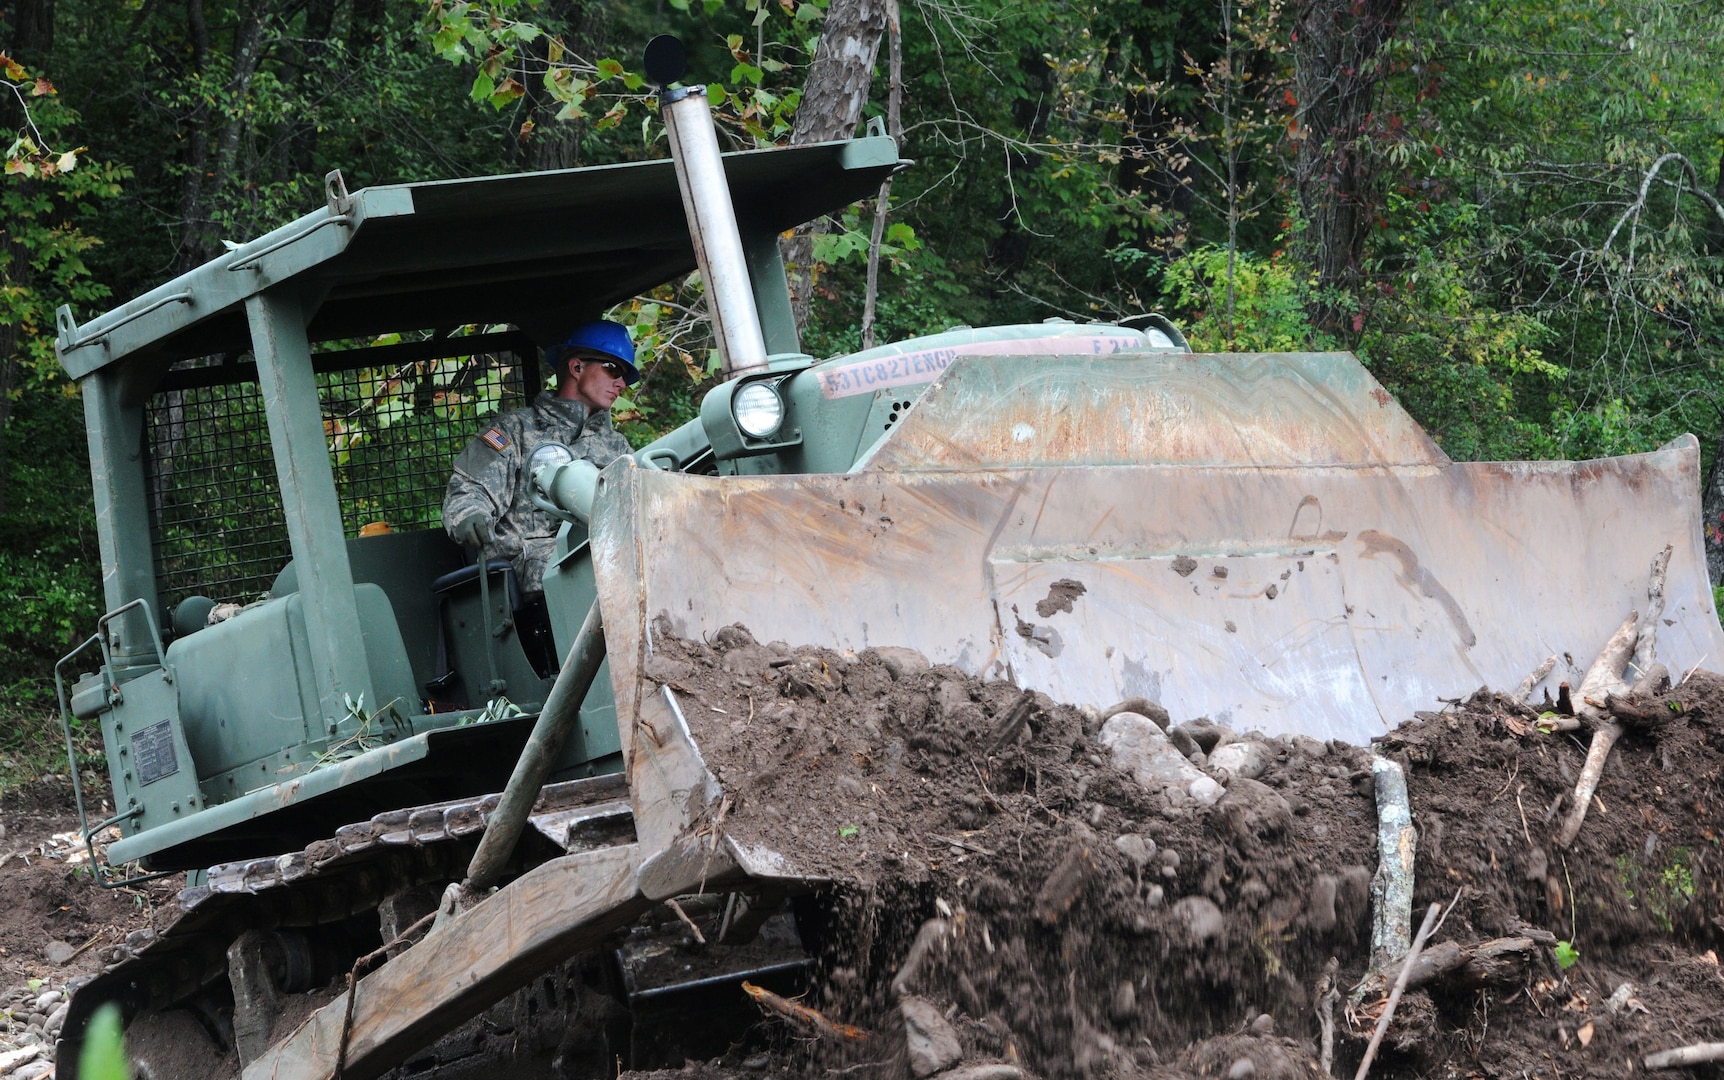 Spc. Dakota Nelson, a heavy equipment operator with the 827th Engineer Company in the New York Army National Guard, operates a D7 Bulldozer as part of the debris cleanup mission in preparation for Hurricane Joaquin, Oct. 2, 2015. The National Guard engineers worked with the Department of Environmental Conservation to clear debris from streams prone to flooding. 